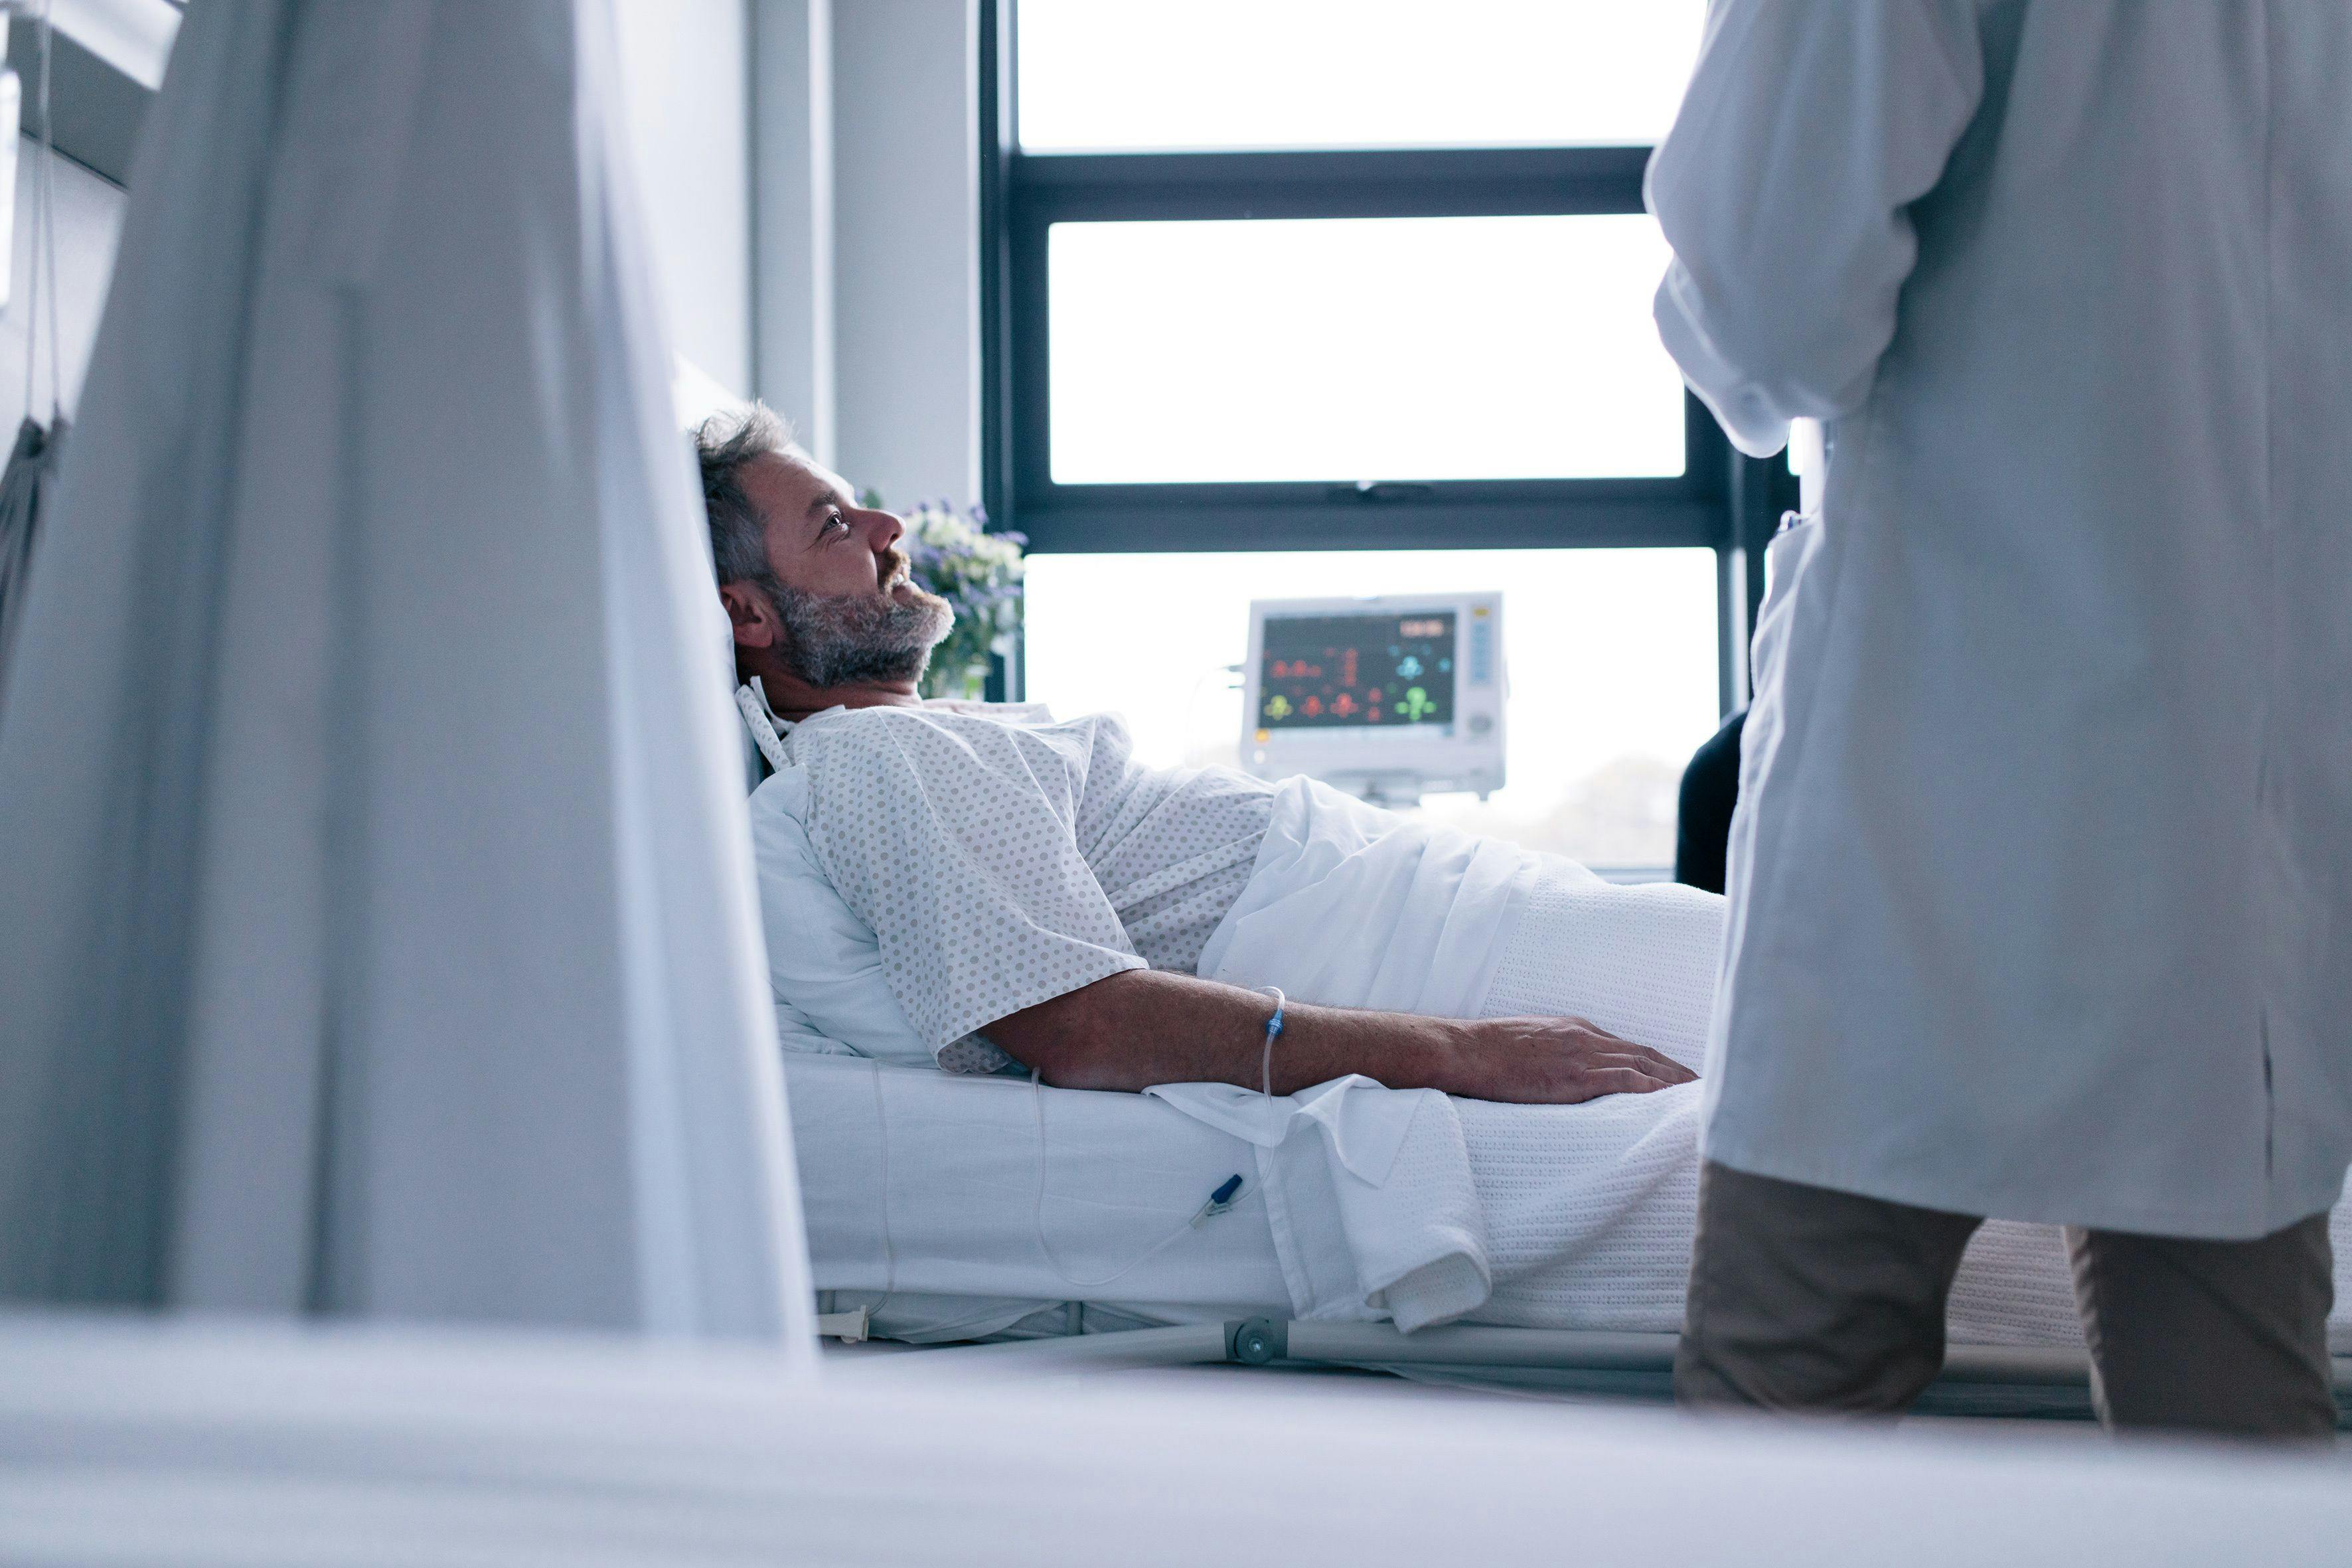 One in three hospital leaders say patient safety efforts are falling short